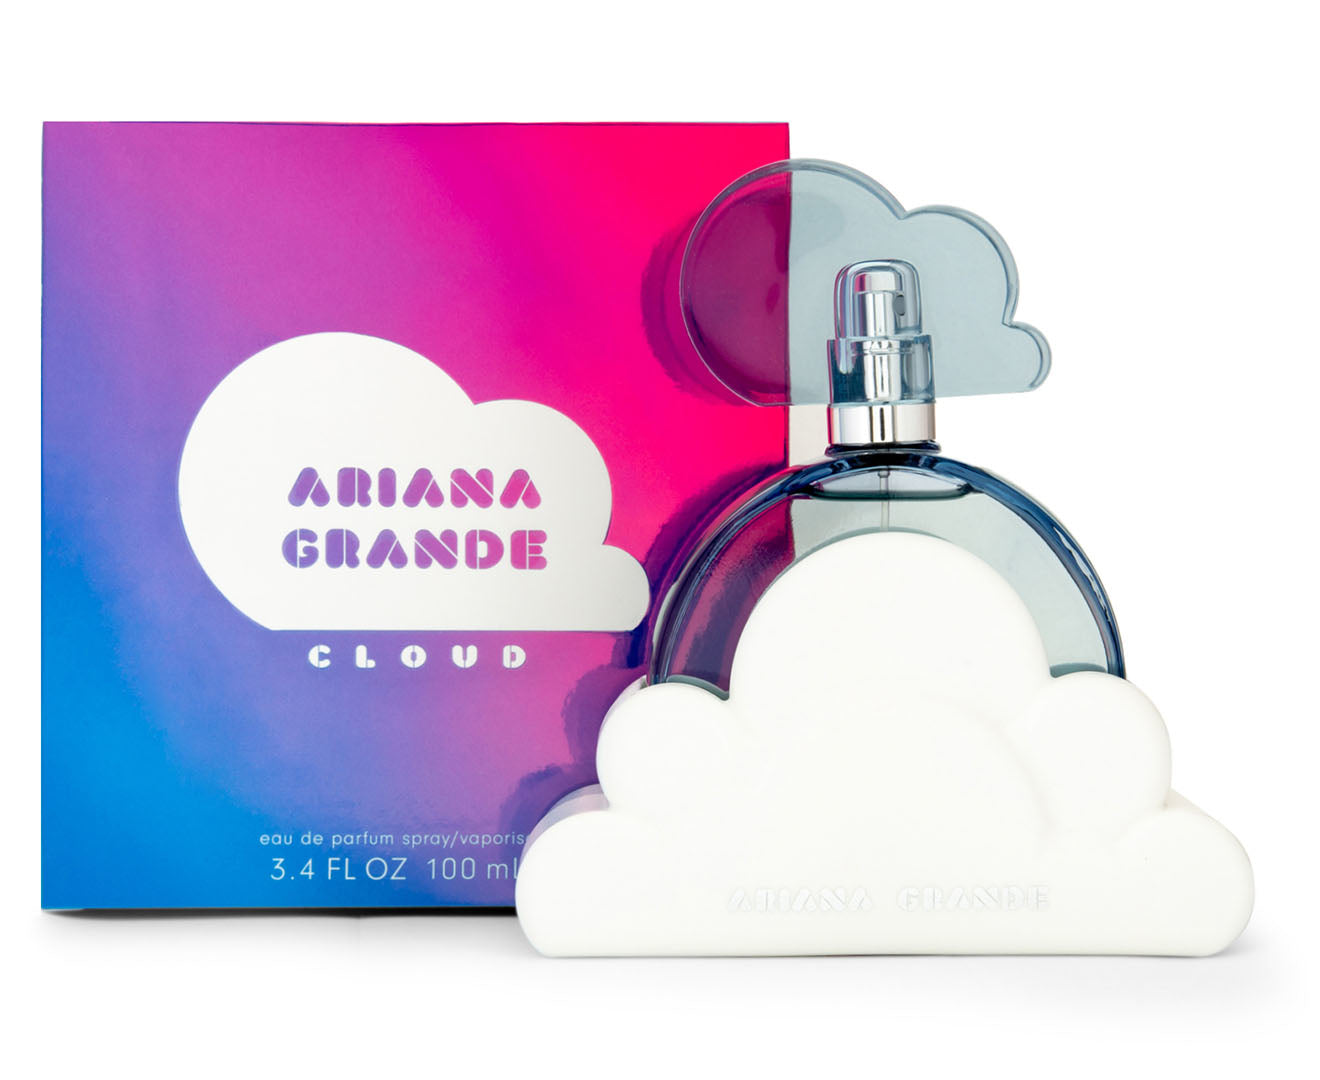 Ariana Grande Cloud Large Soy Candle